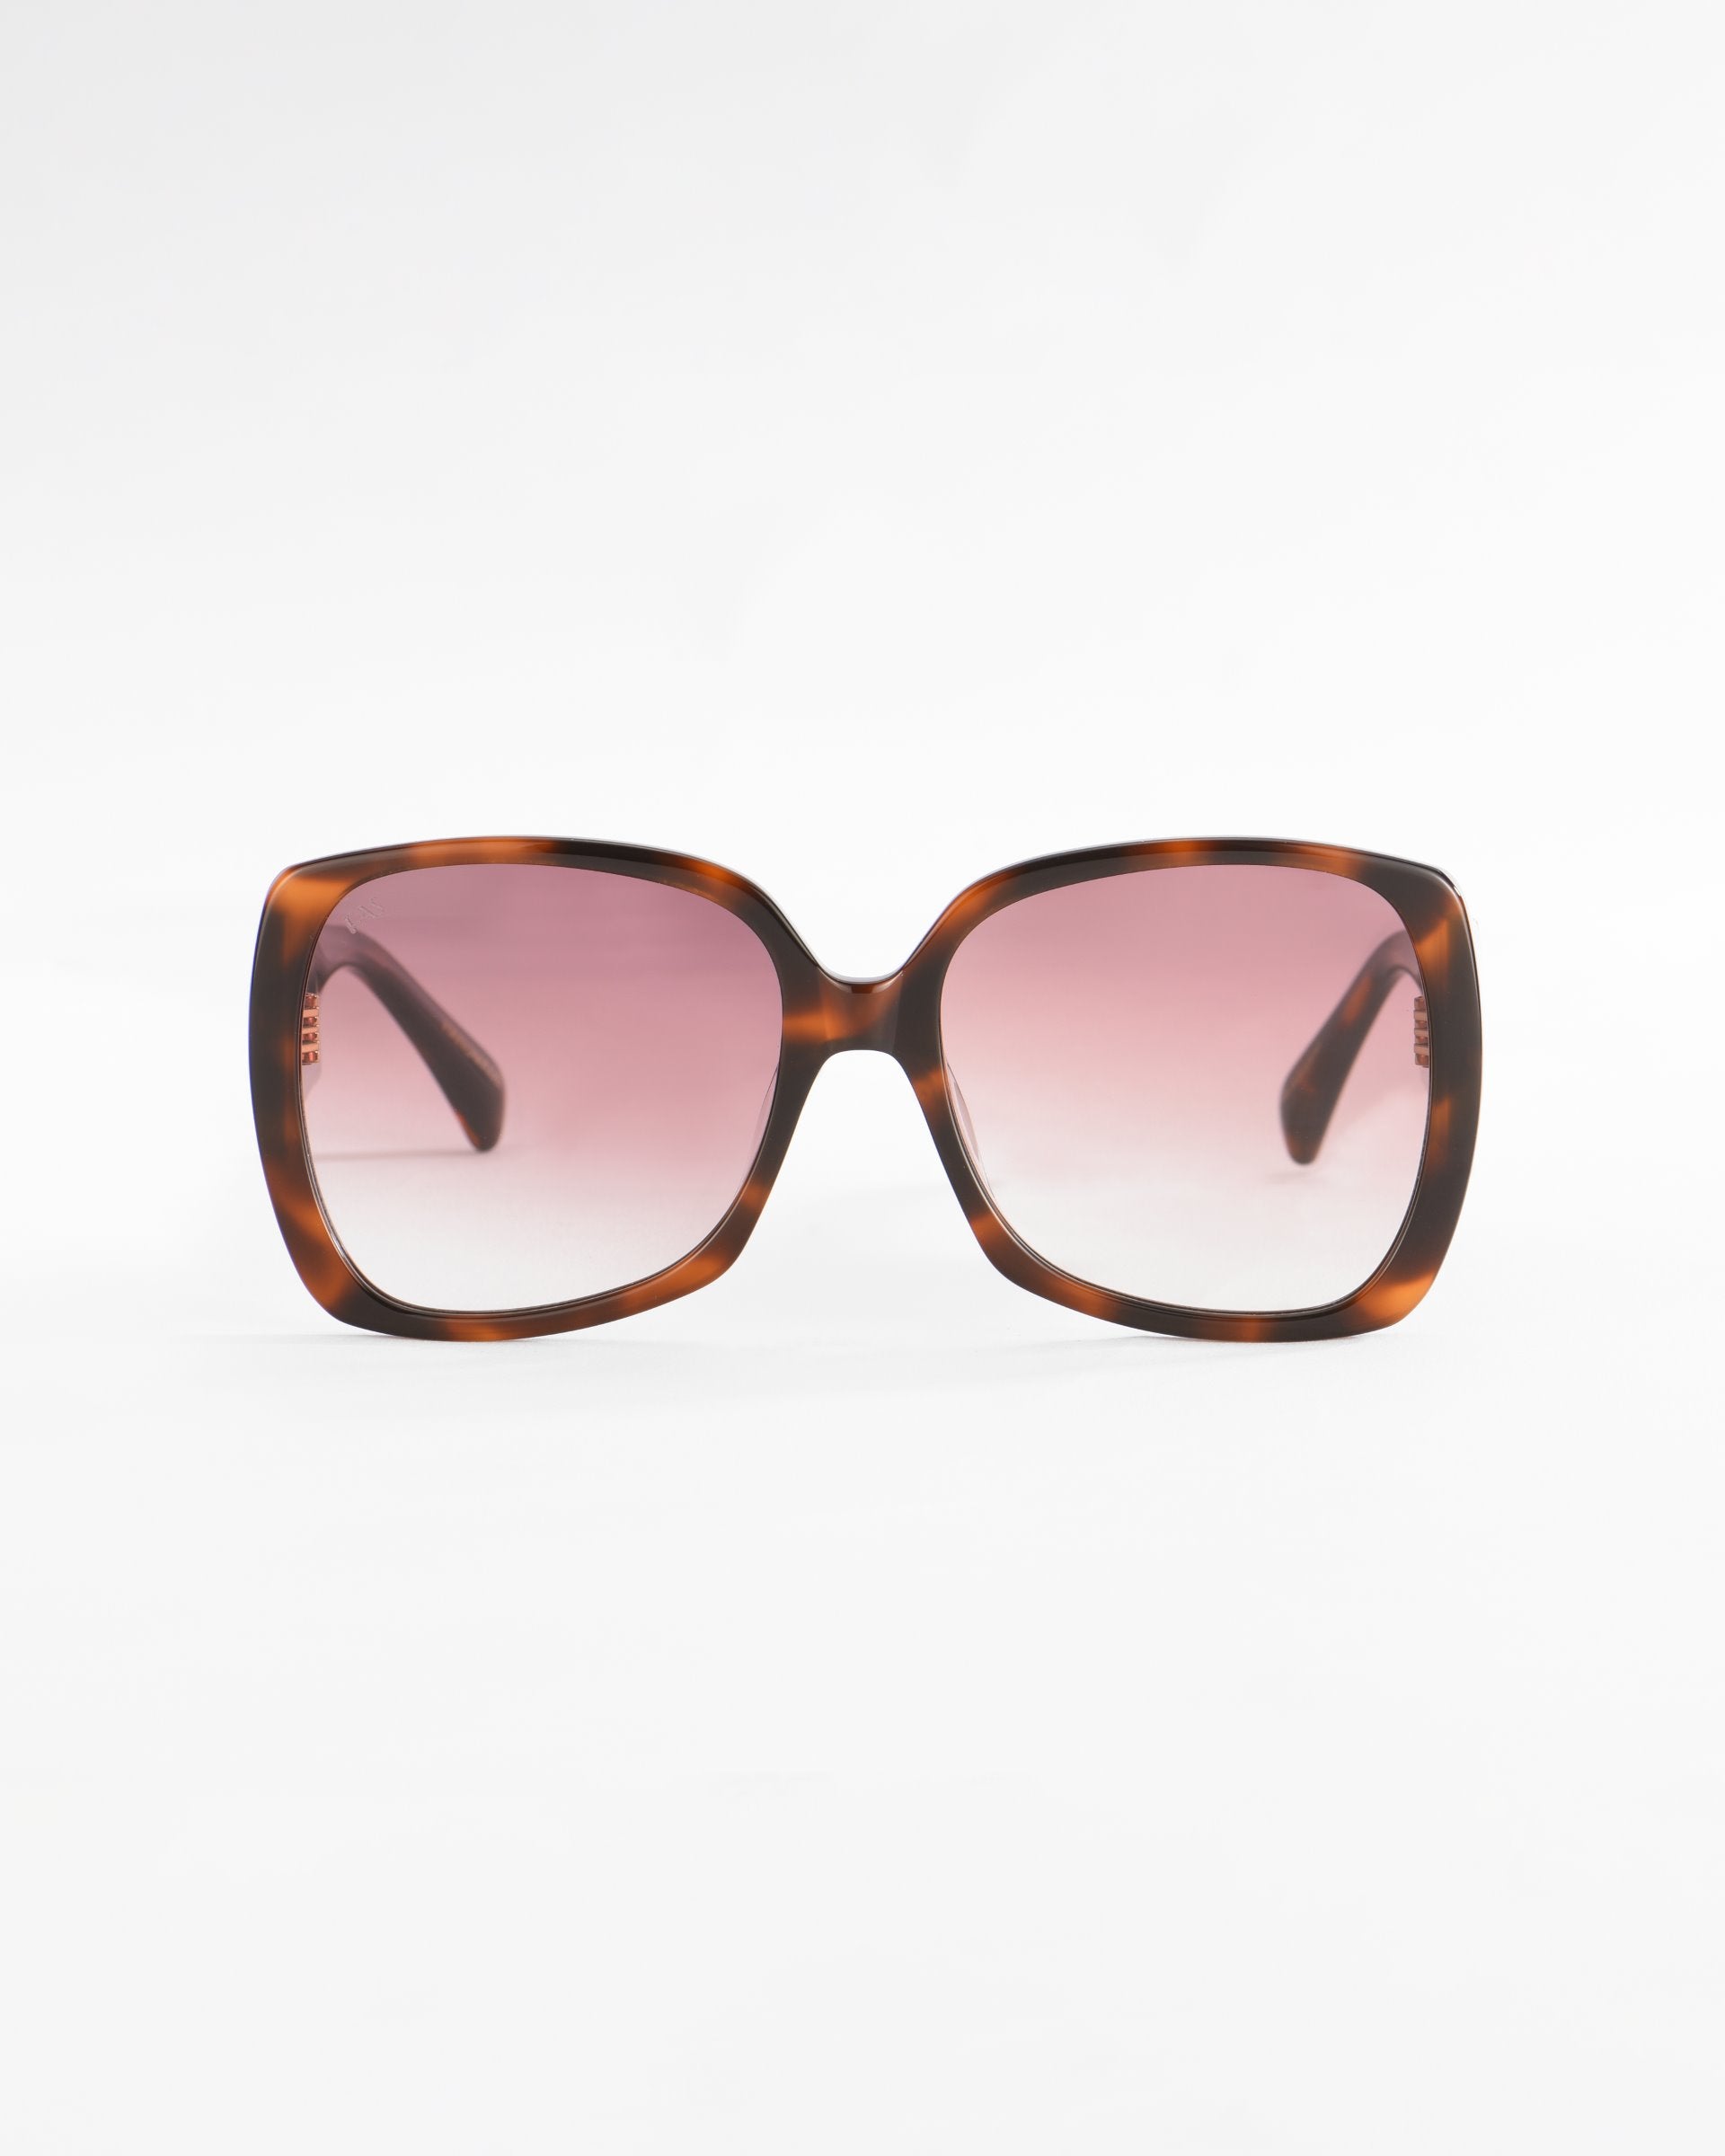 A pair of oversized, square-framed sunglasses with a tortoiseshell pattern made from plant-based acetate. The lightweight nylon lenses are tinted in a gradient, transitioning from dark to light pink. The background is plain and white. These are the Odyssey sunglasses by For Art&#39;s Sake®.